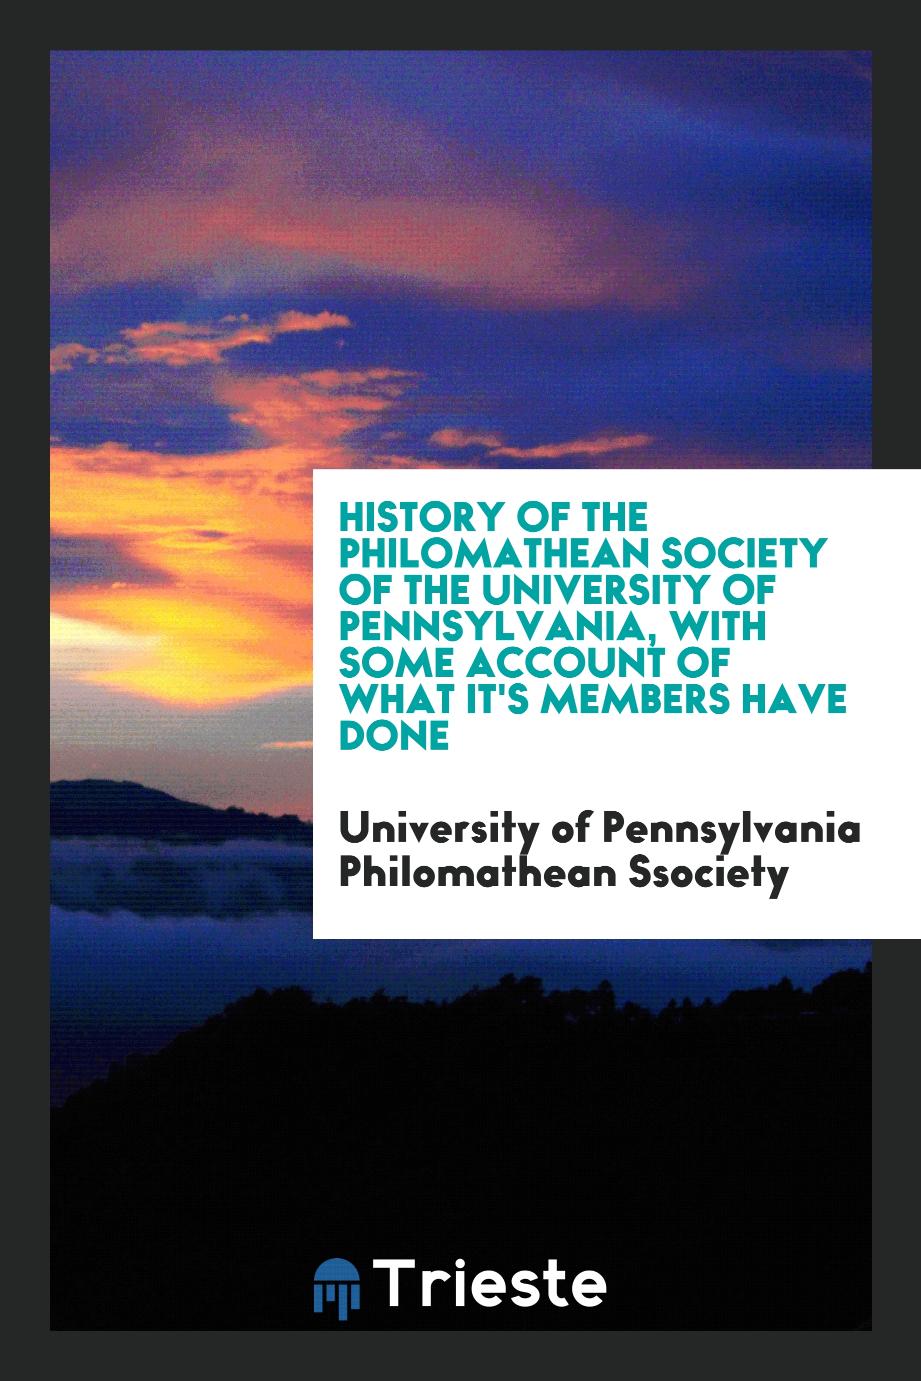 History of the Philomathean Society of the University of Pennsylvania, with some account of what it's members have done